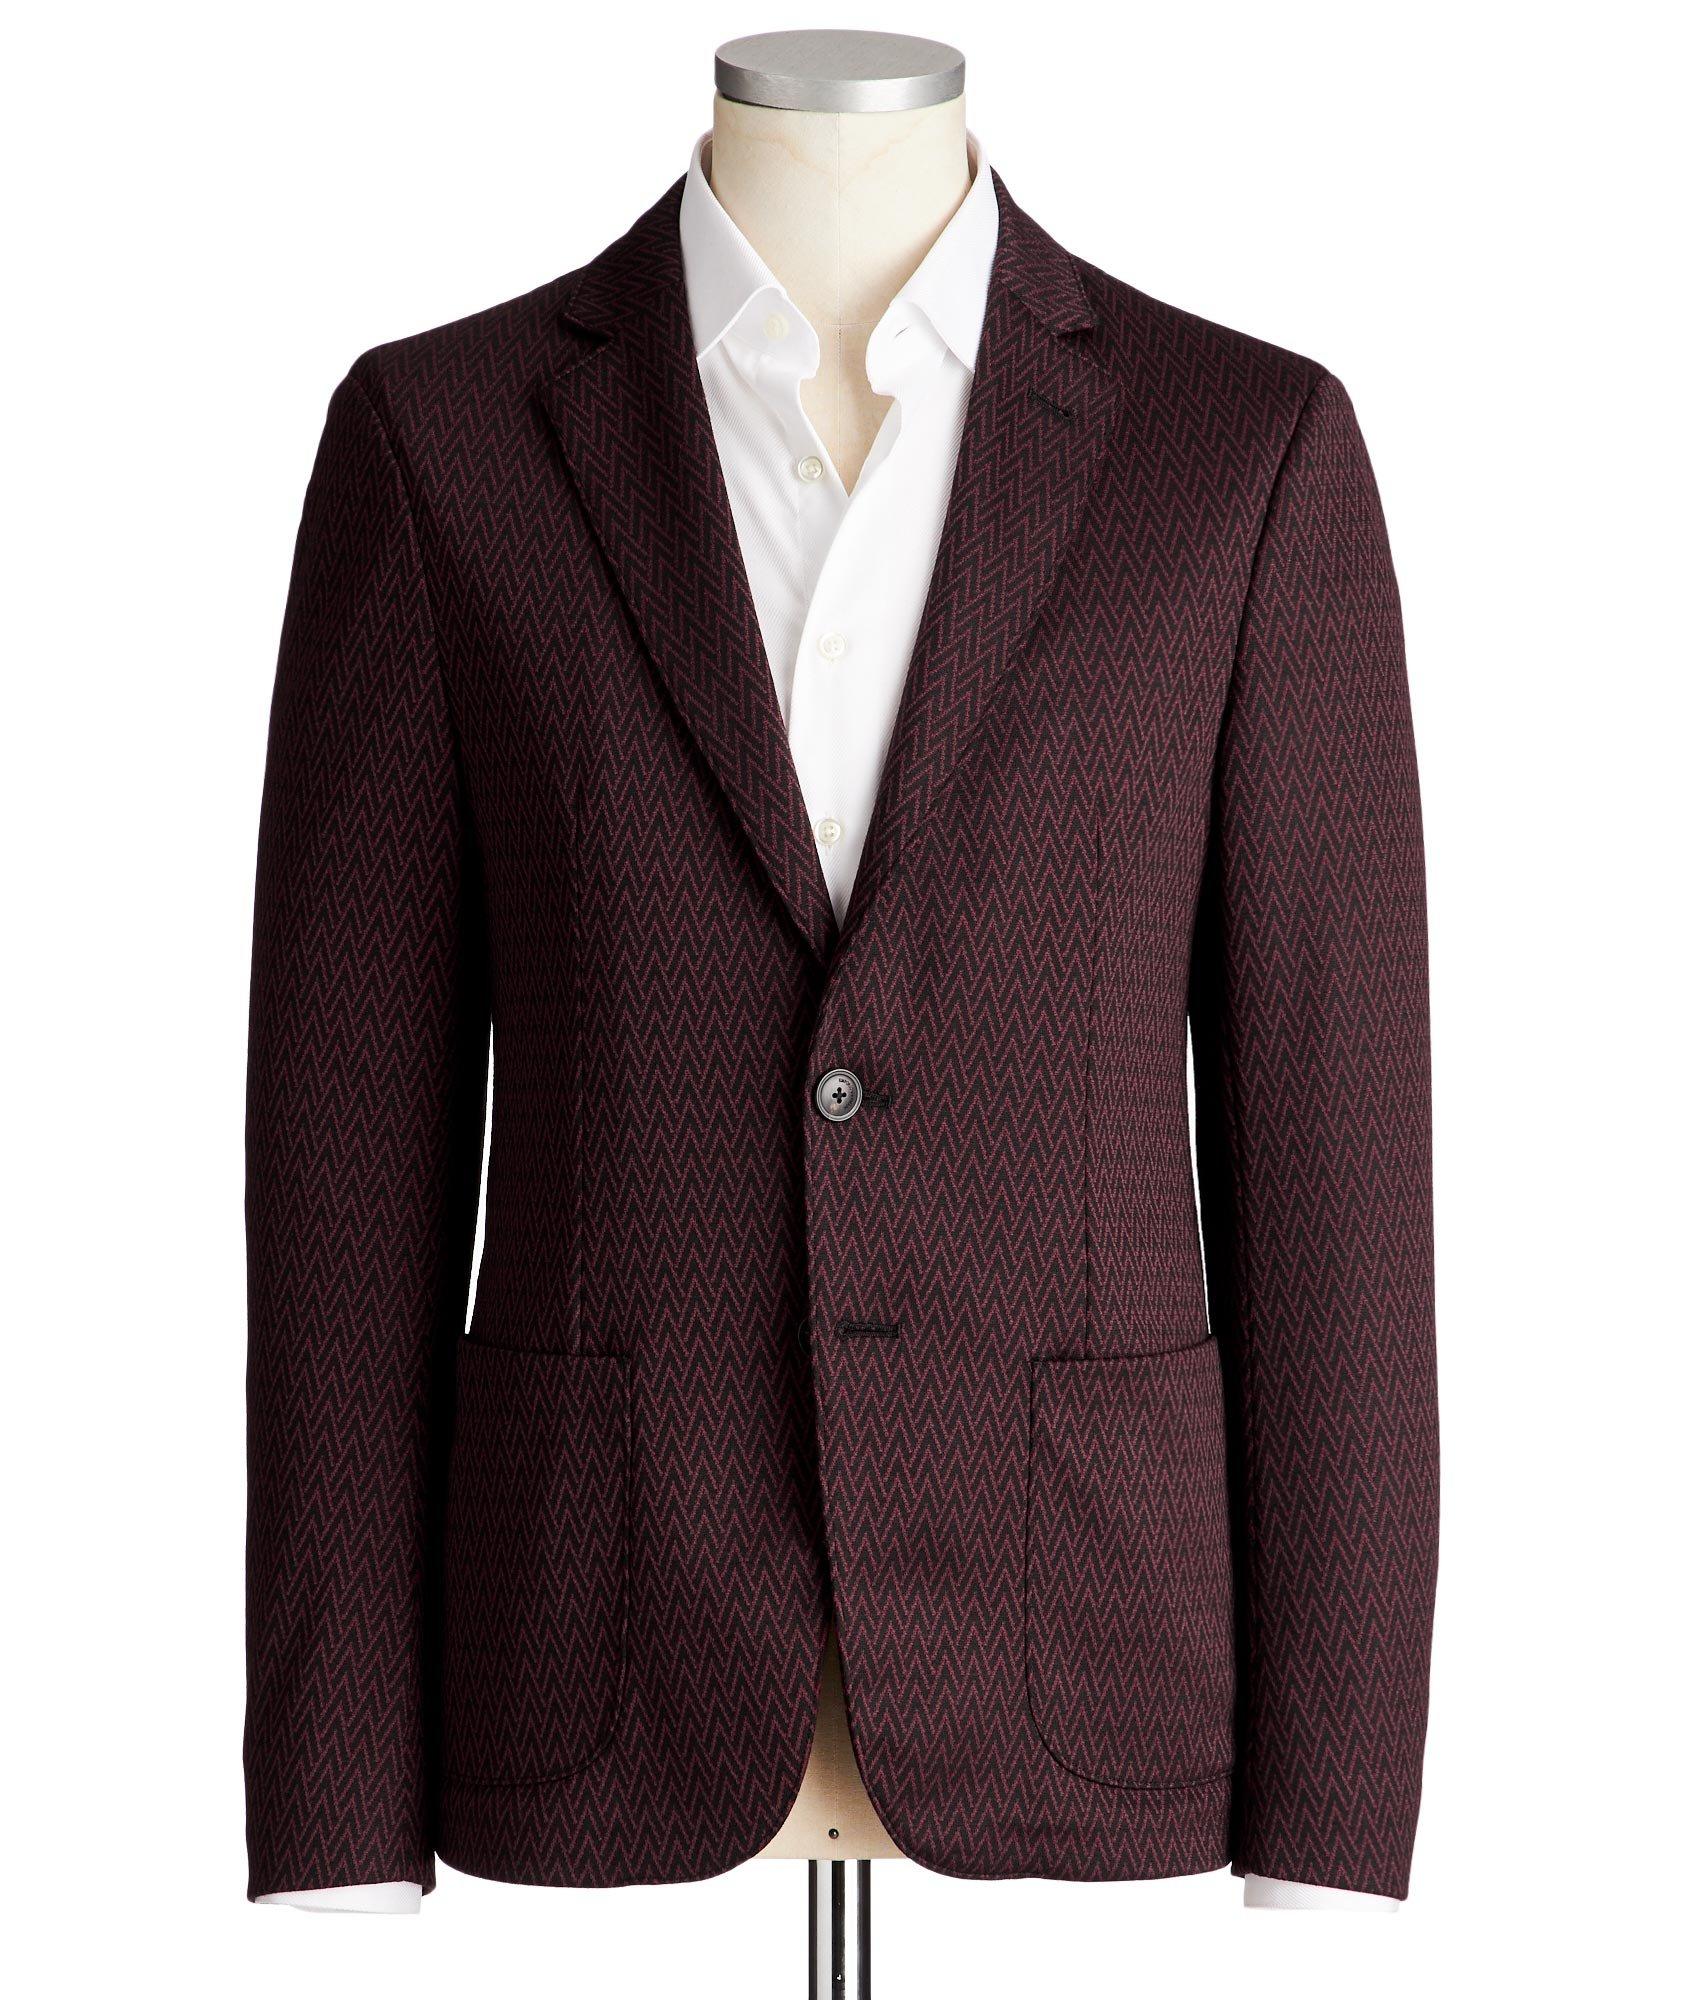 Unstructured Wool-Blend Sports Jacket image 0